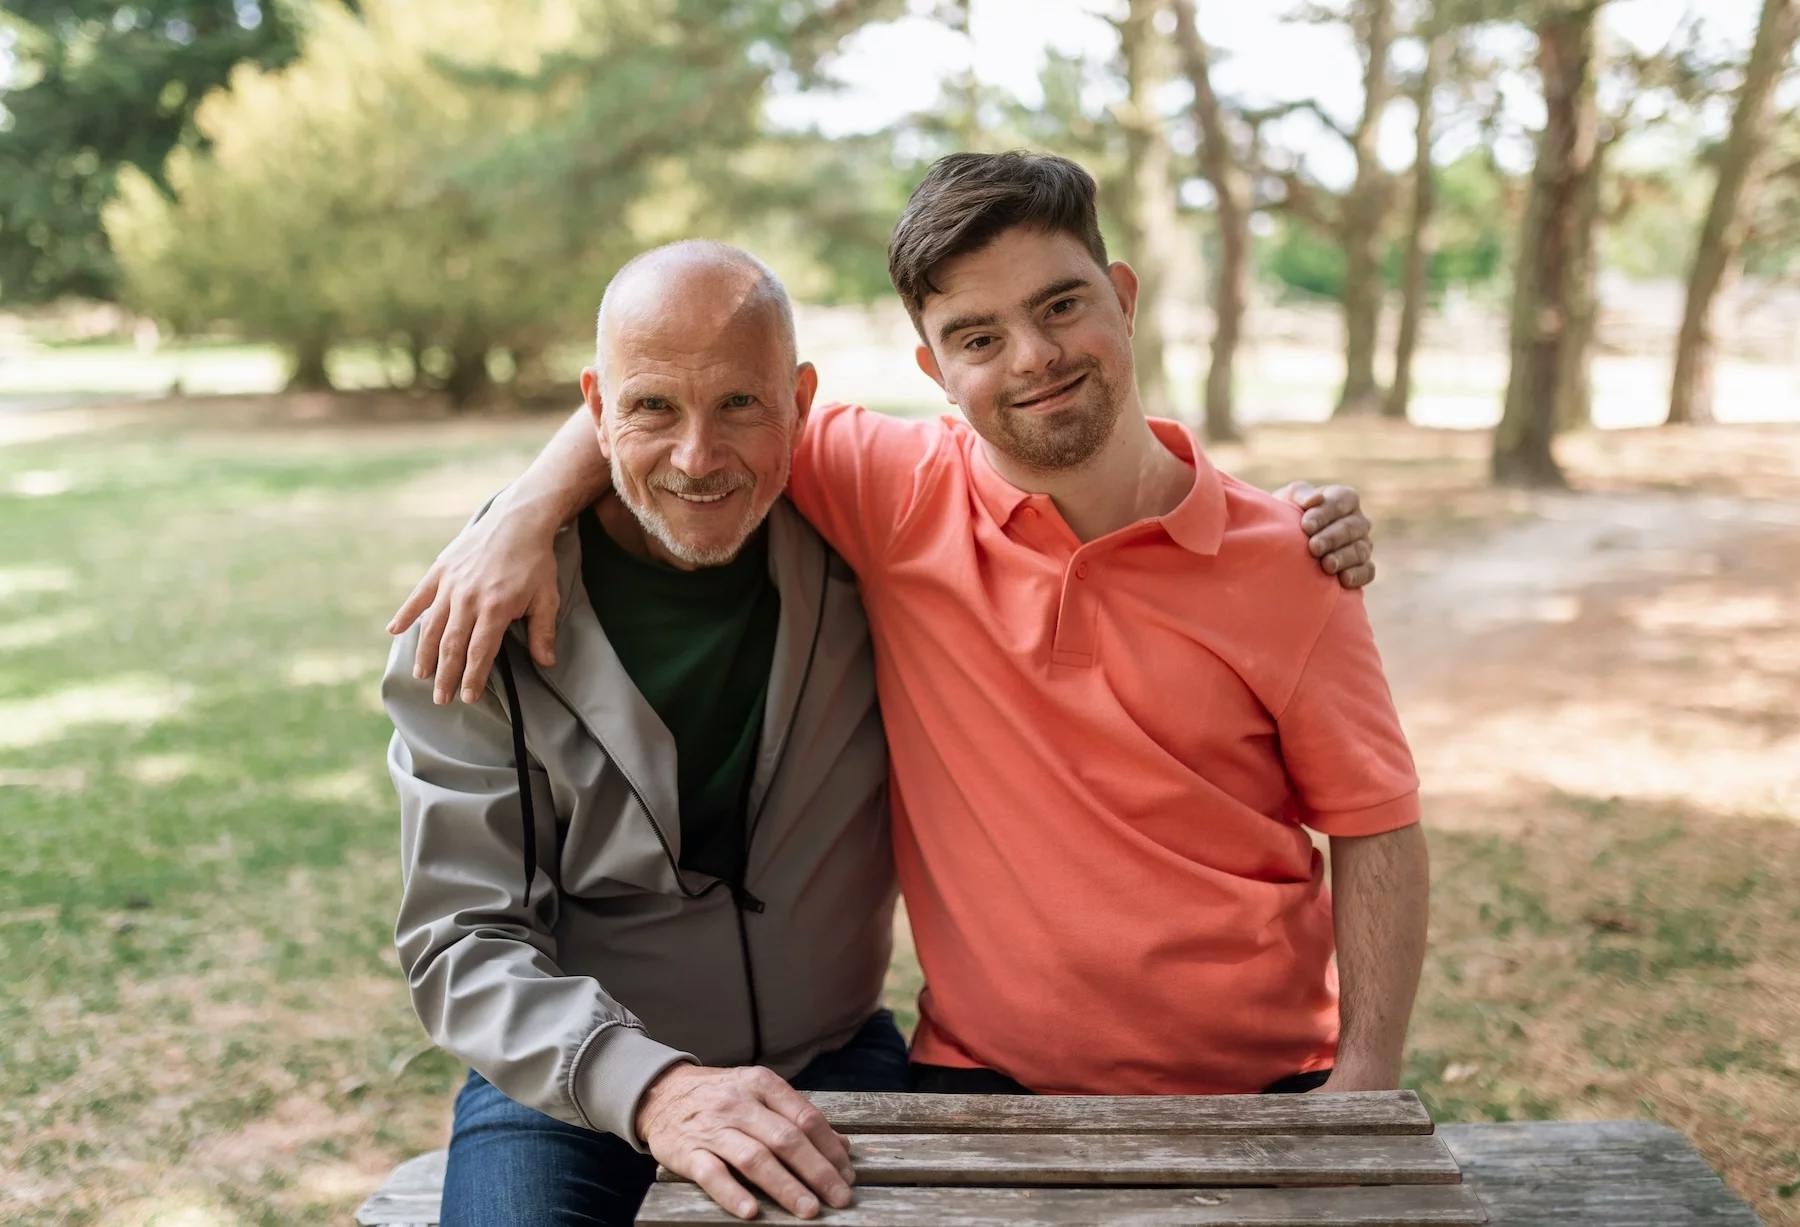 Happy senior father with his young son with Down syndrome embracing and sitting in park.